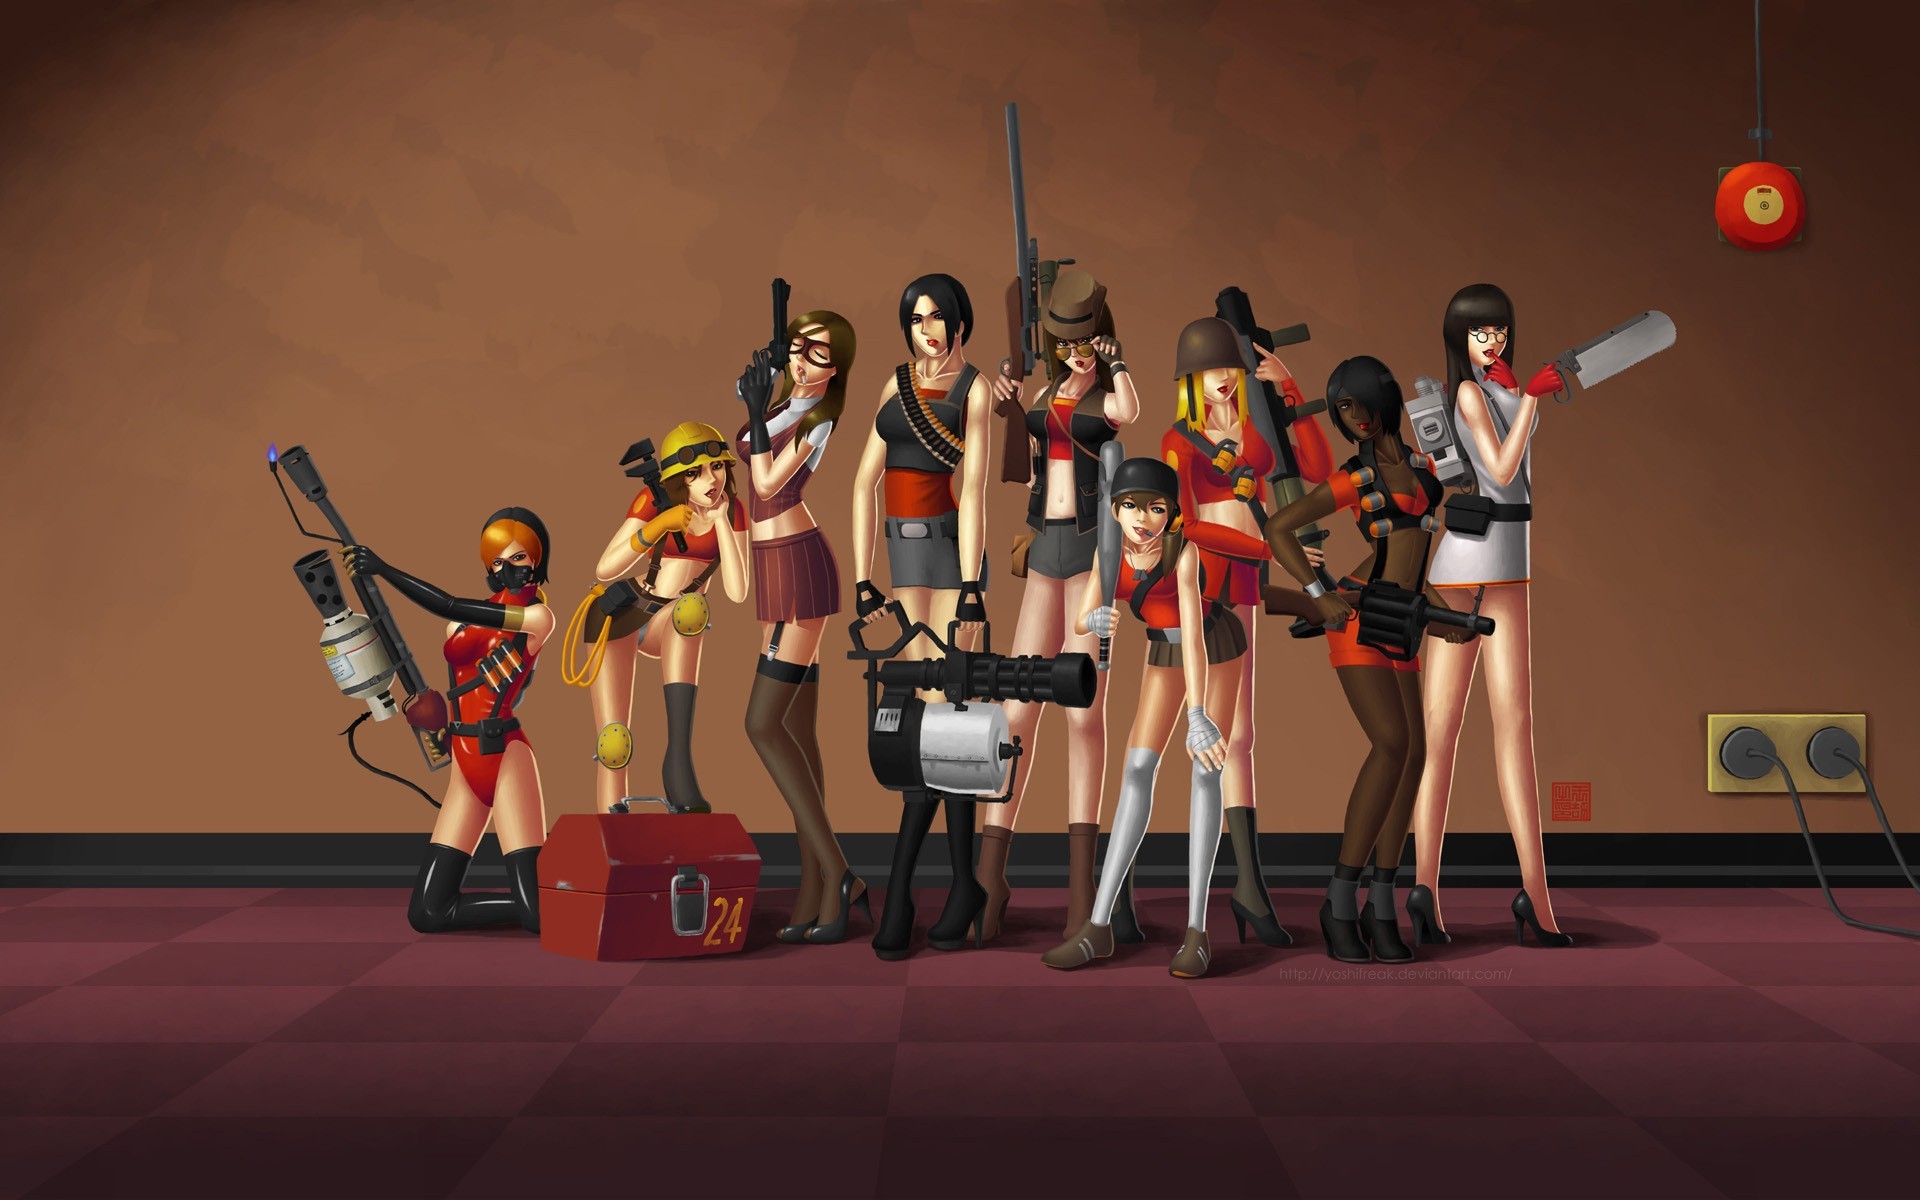 1920x1200 348 Team Fortress 2 HD Wallpapers | Backgrounds - Wallpaper Abyss - Page 6